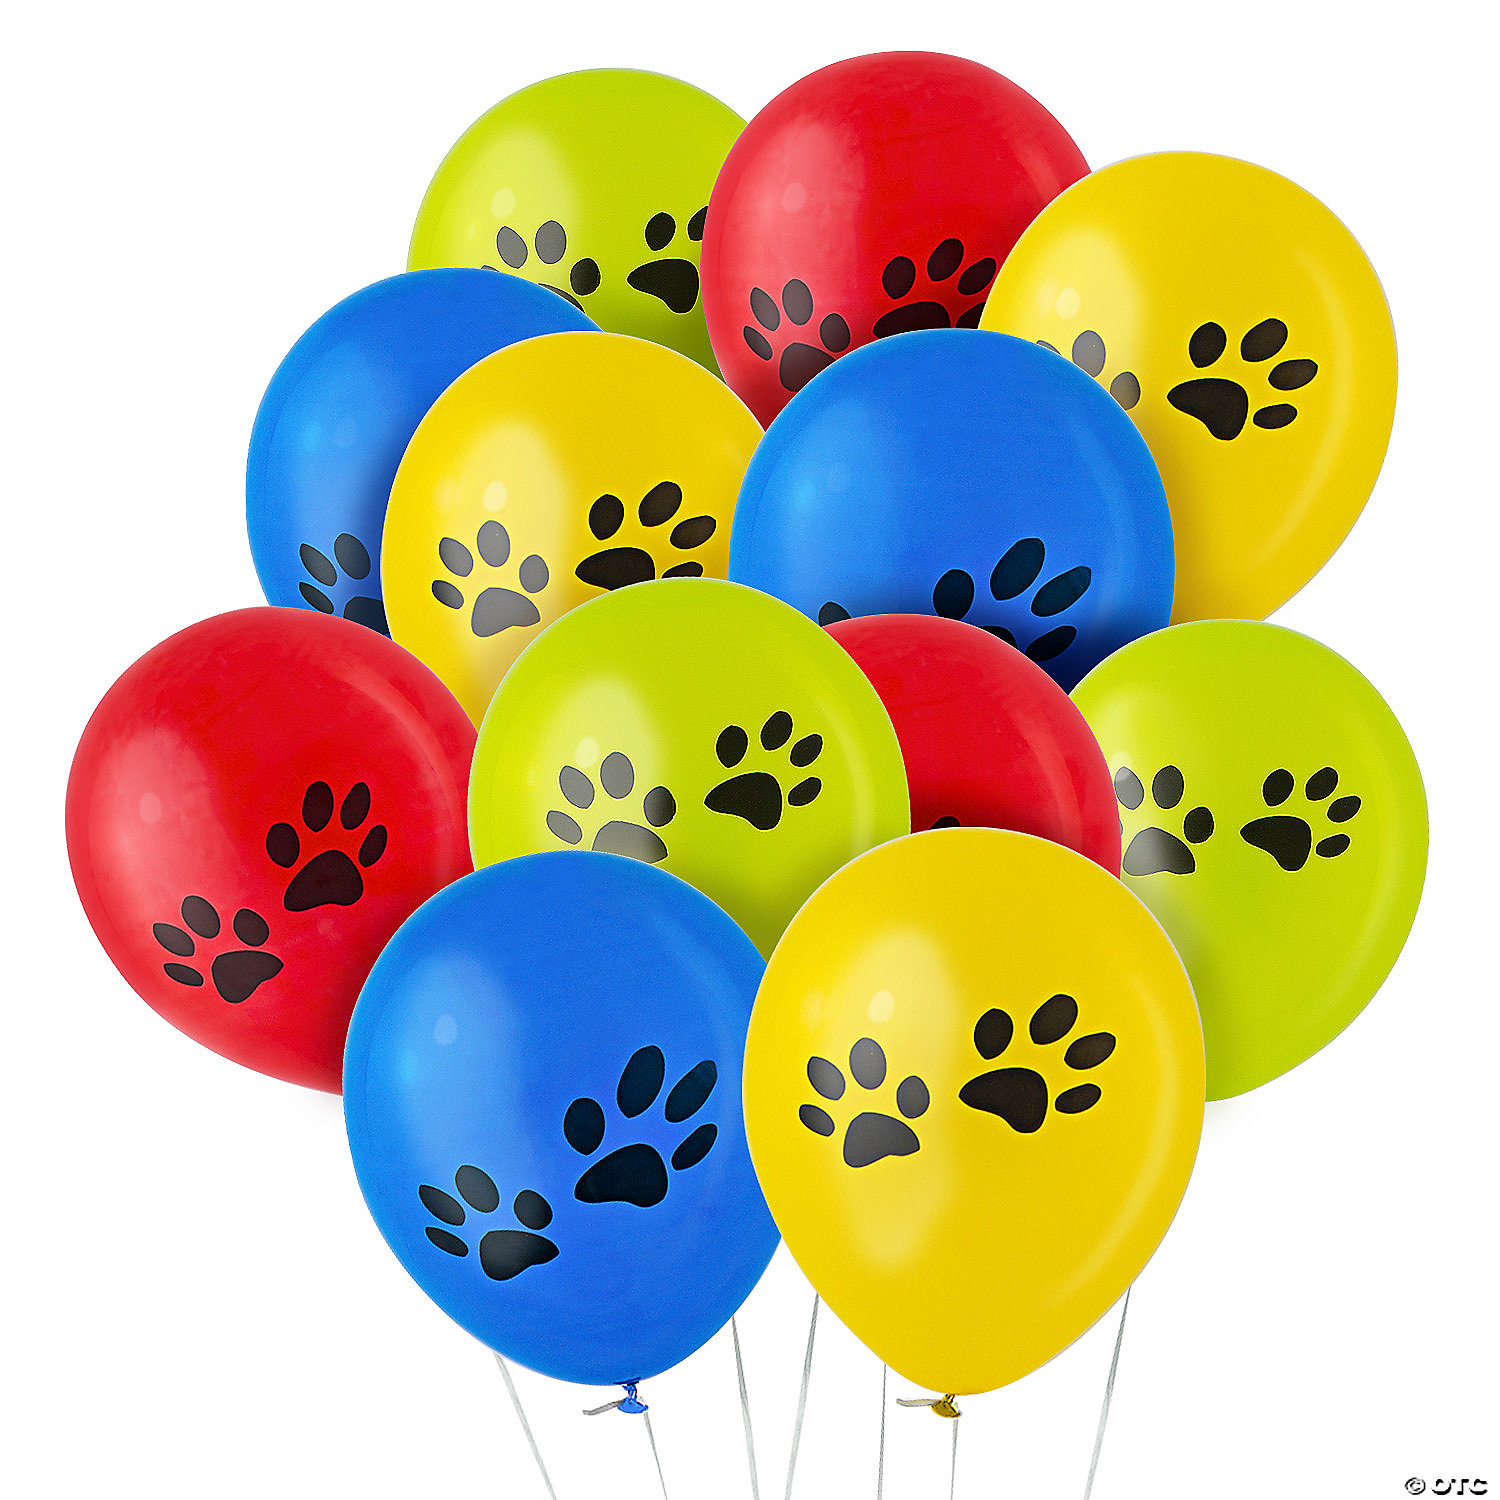 Holicolor 12inches 100pcs Colorful Latex Paw Print Balloons with Balloon Clips for Paw Party Red, Yellow, Blue, Dog Paw